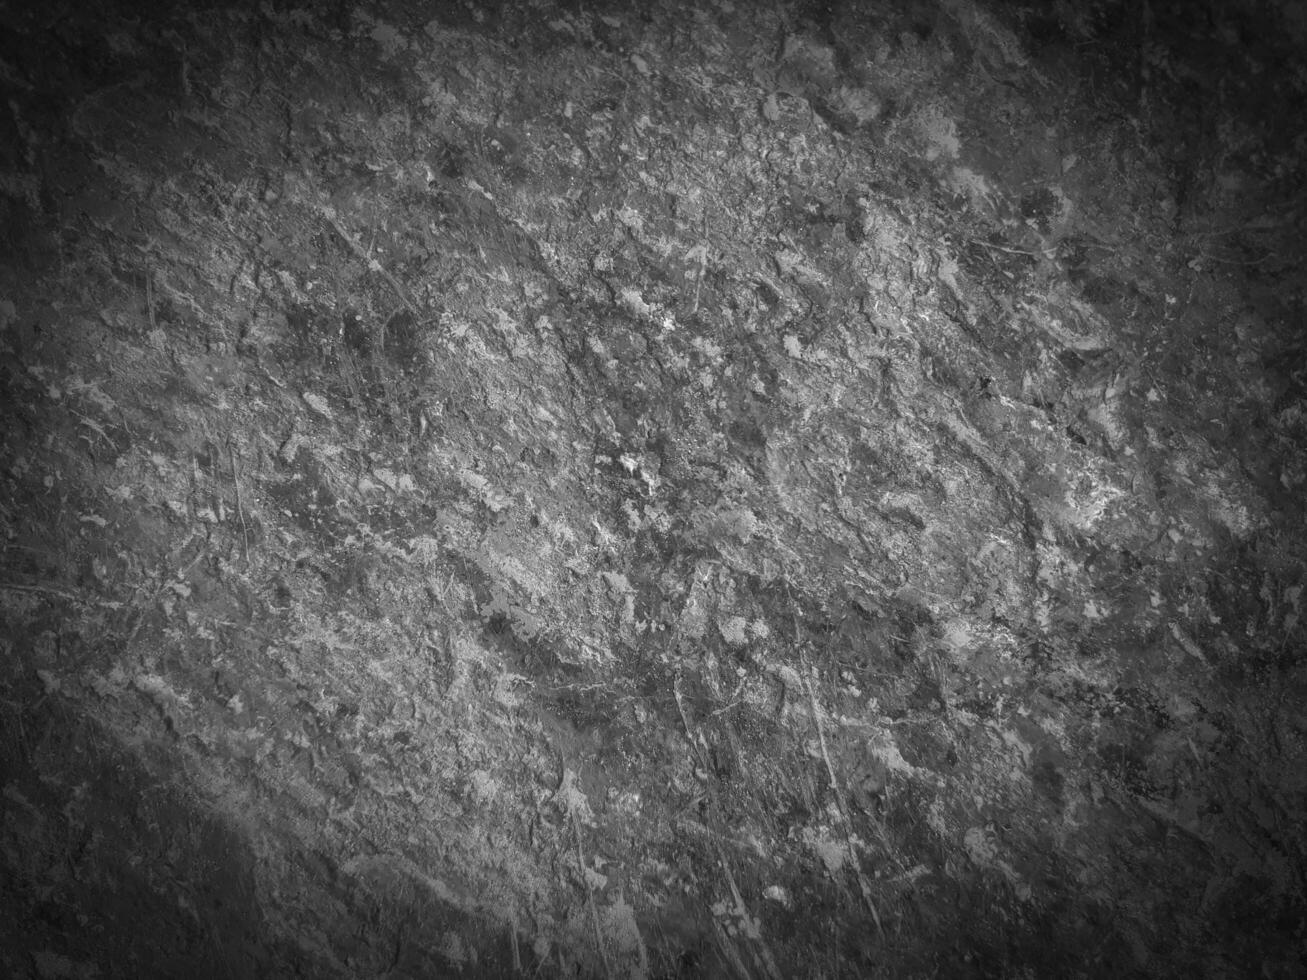 Black stone background. Long black stone texture and textured. Dirty black stone wall. Rock texture with cracks. stone tile floor texture. Old wall texture abstract natural background. photo